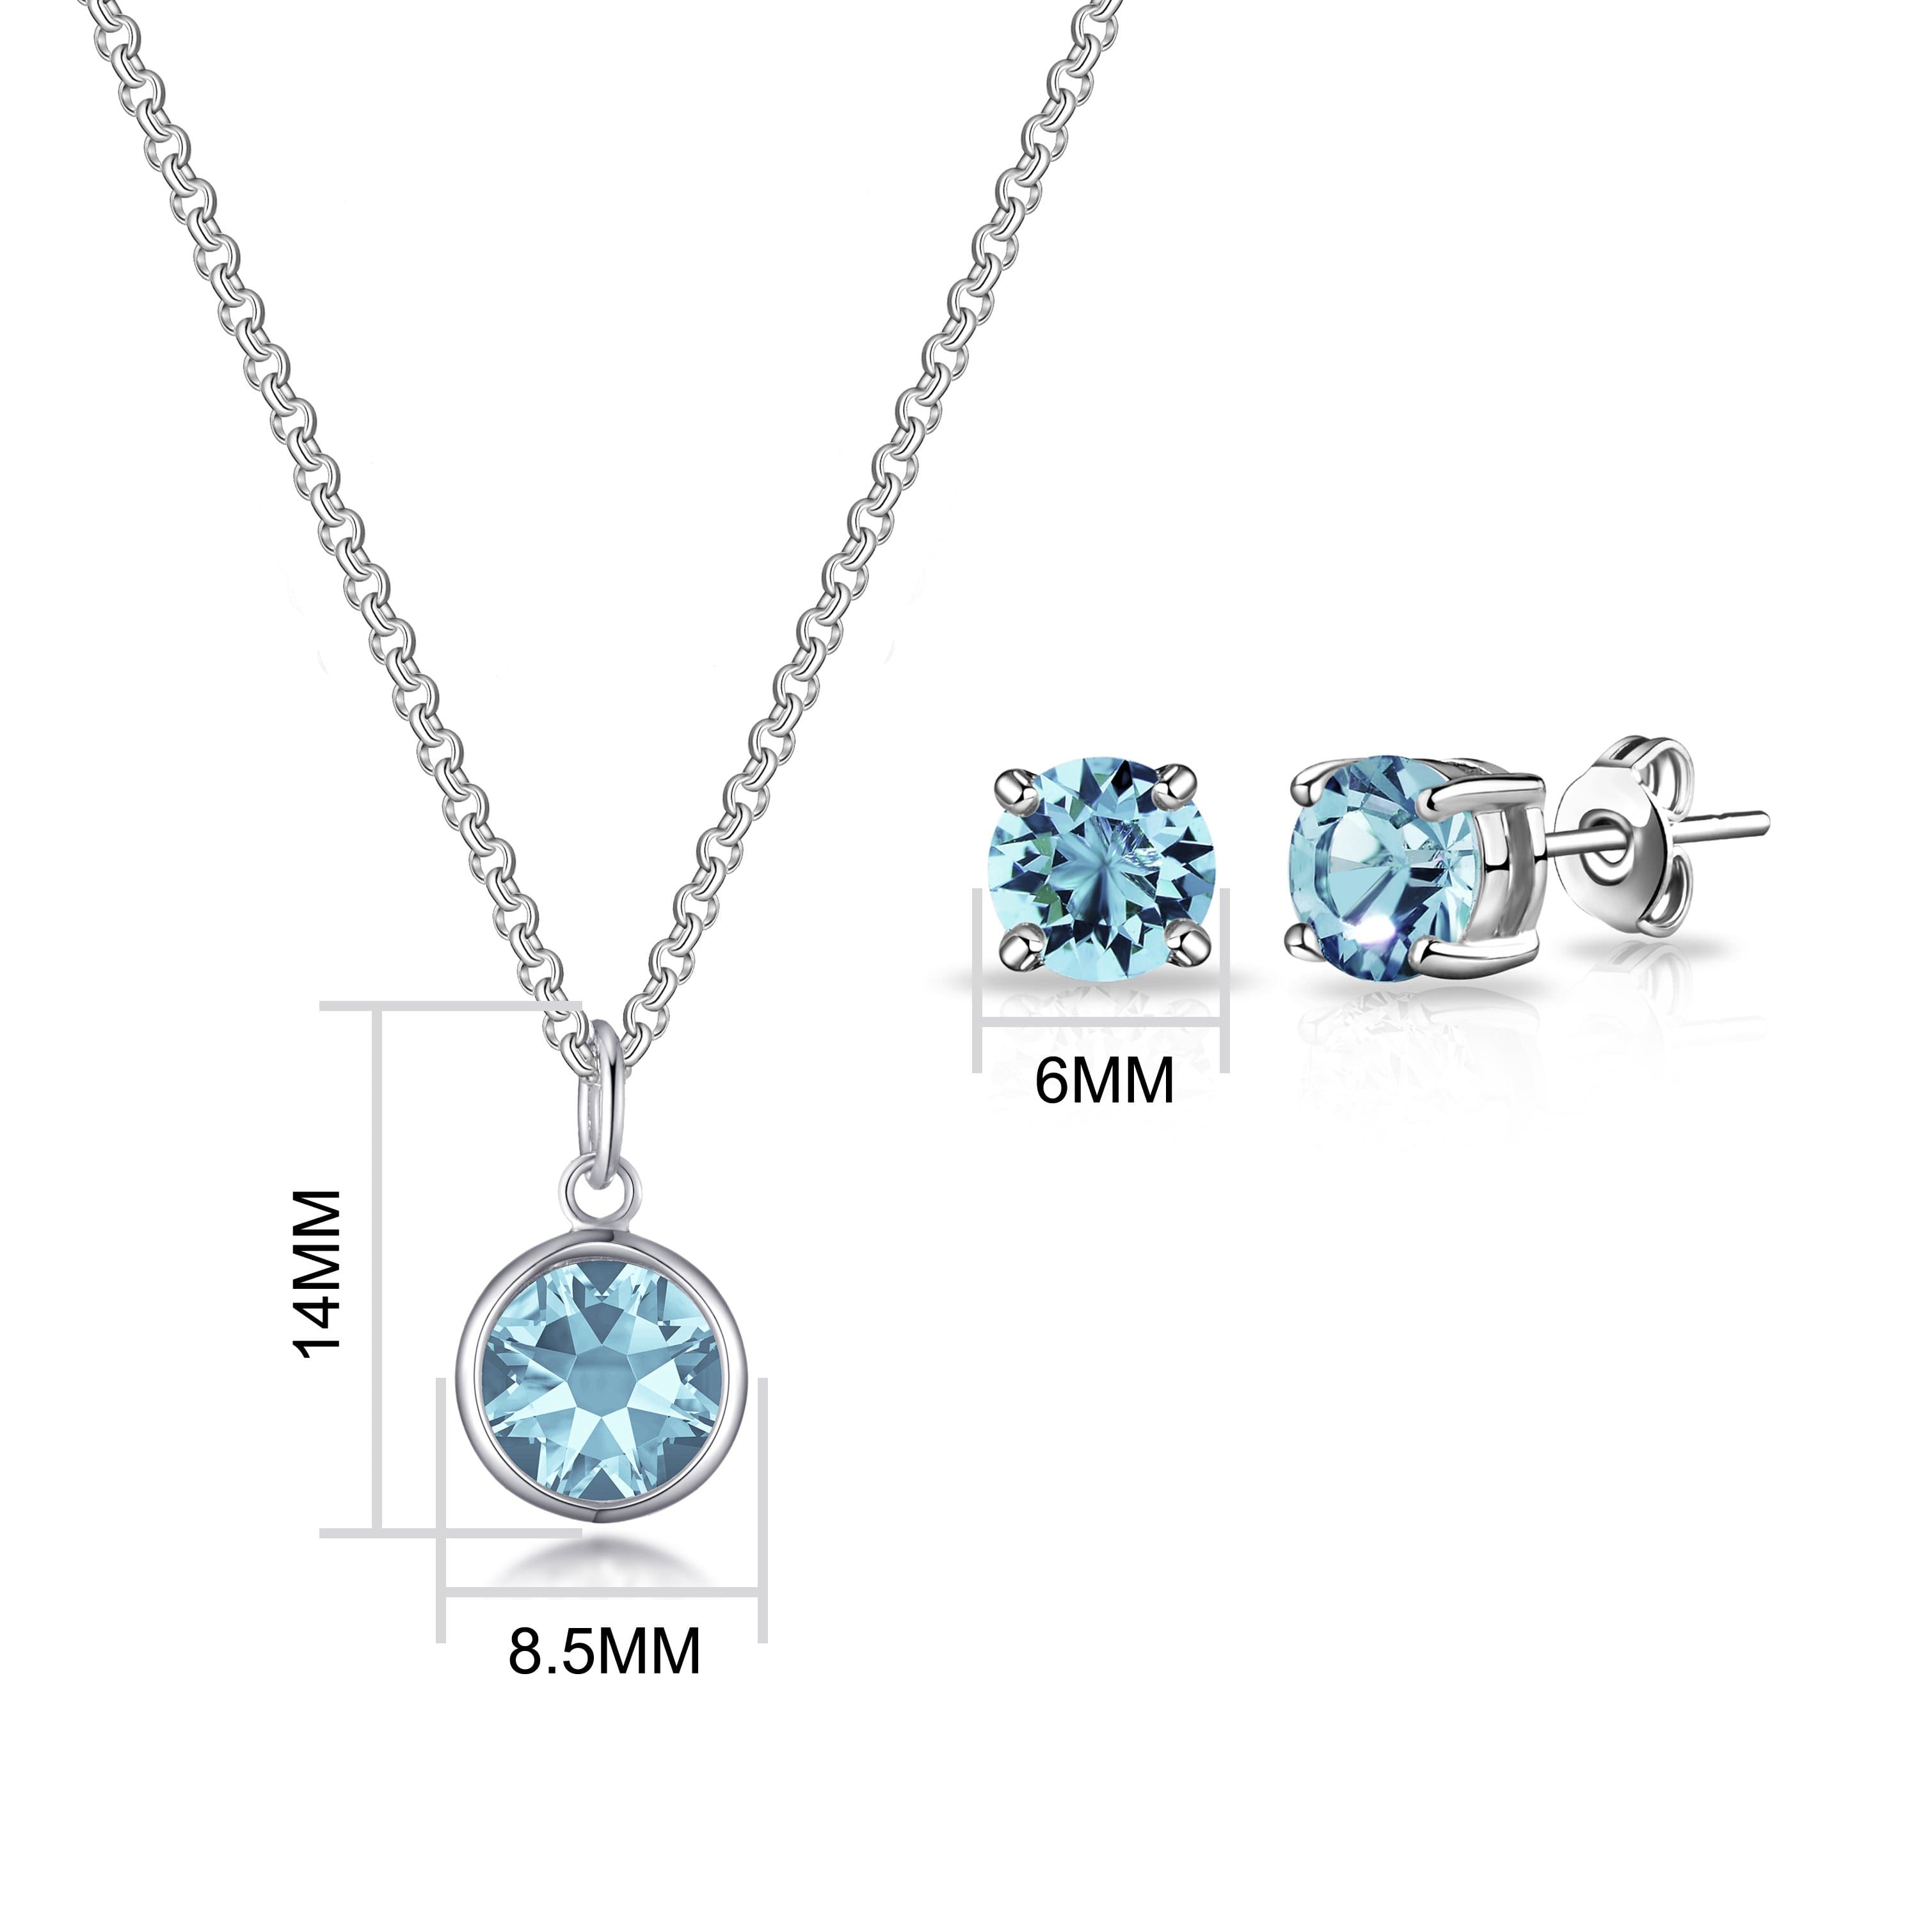 March (Aquamarine) Birthstone Necklace & Earrings Set Created with Zircondia® Crystals